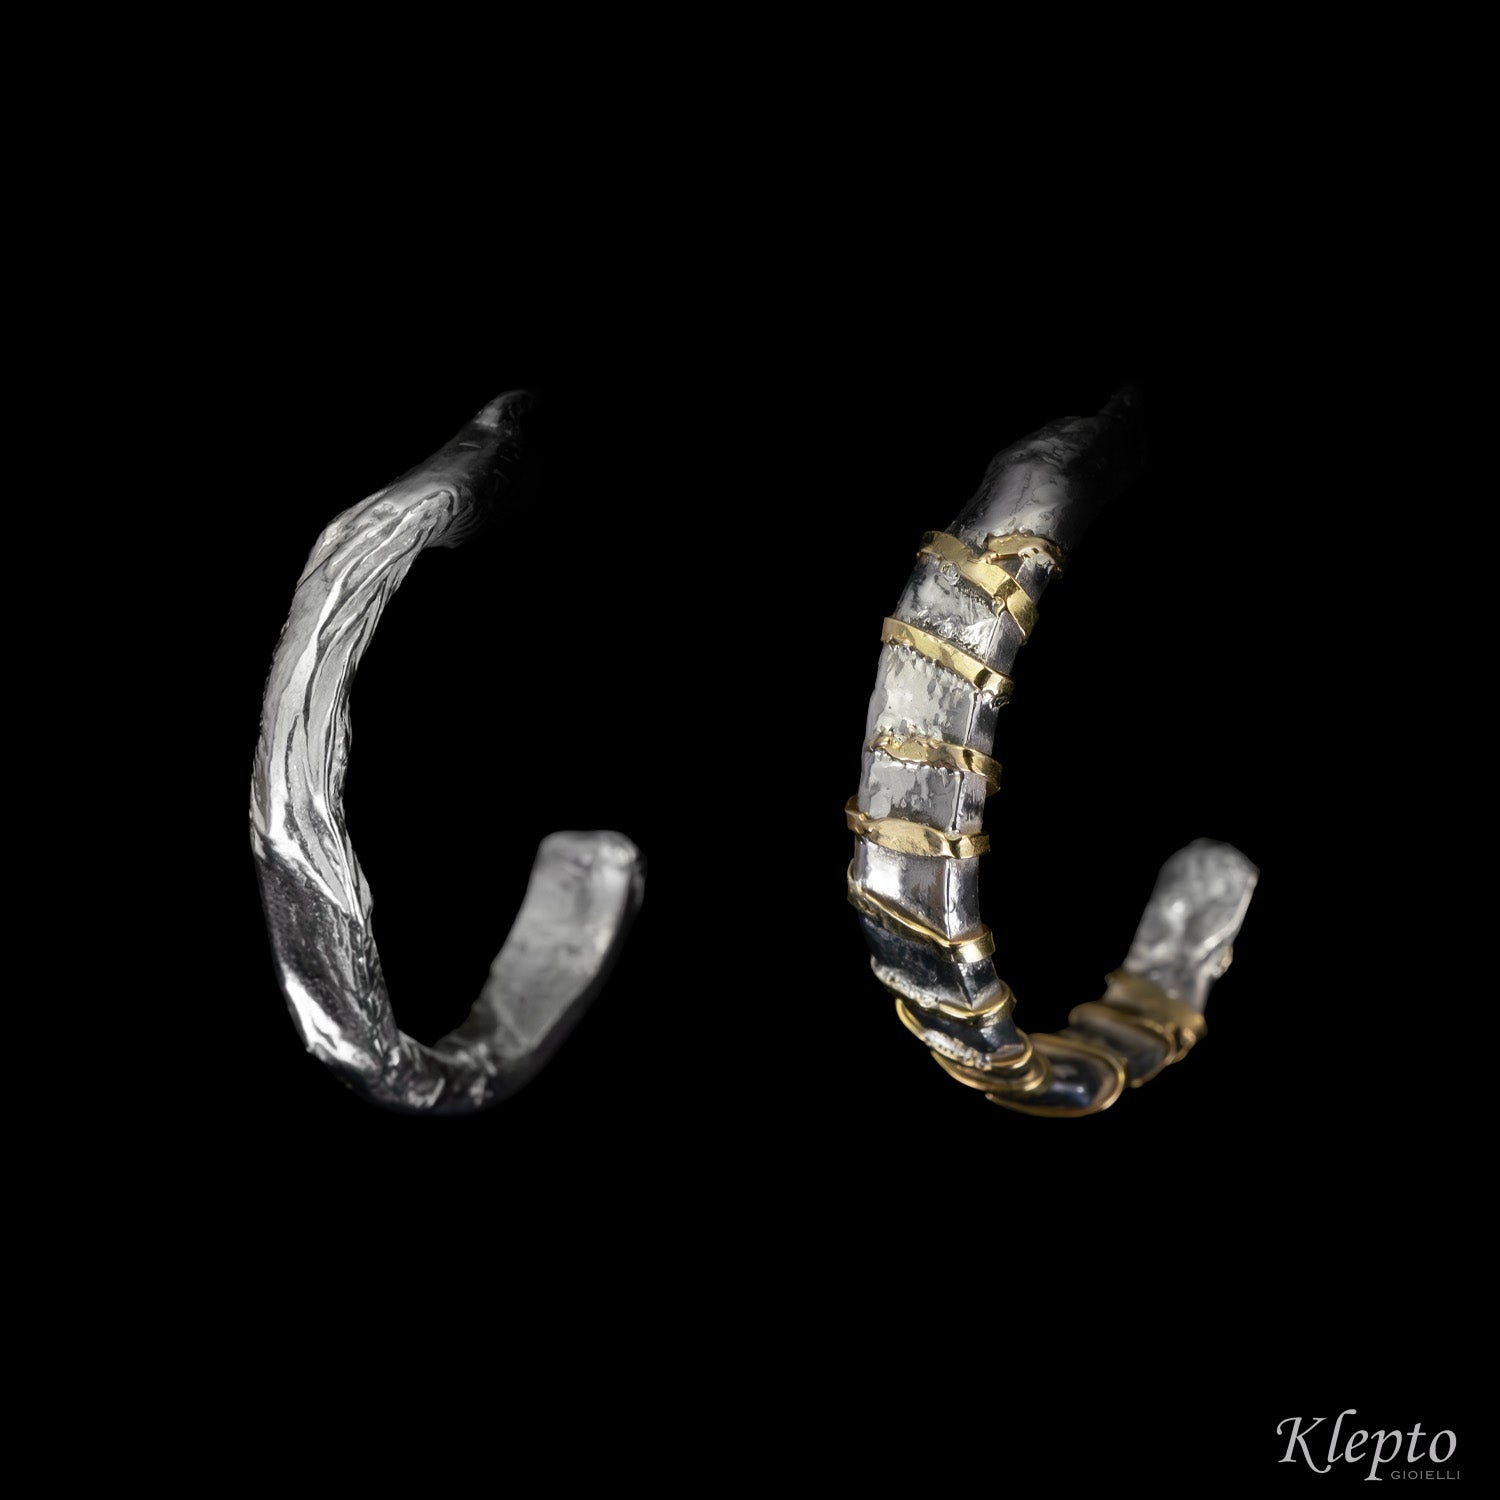 Silnova® Silver earrings with yellow gold details